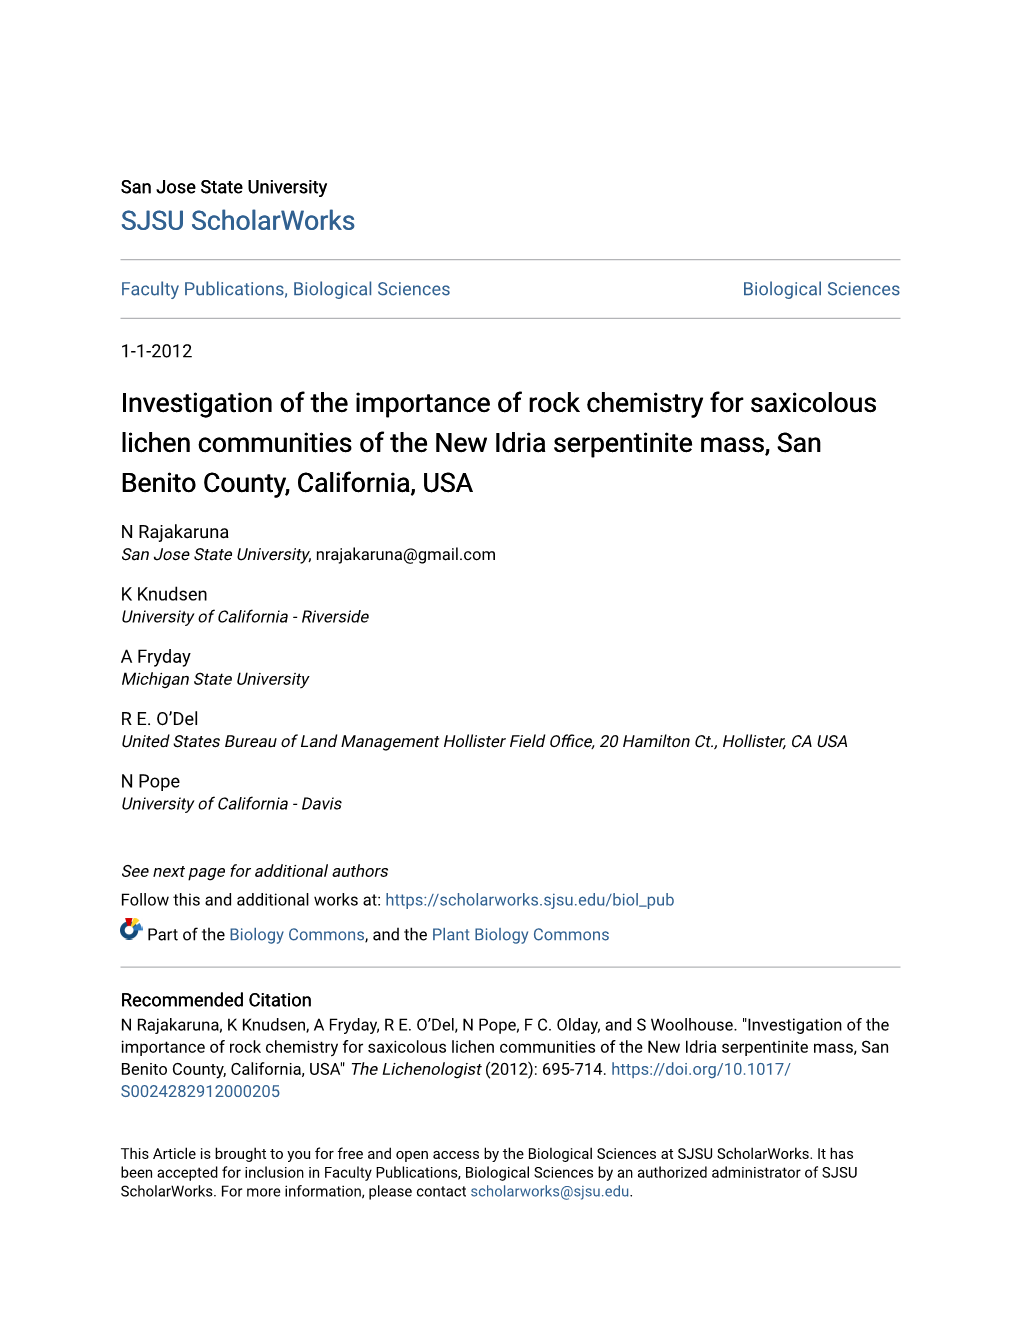 Investigation of the Importance of Rock Chemistry for Saxicolous Lichen Communities of the New Idria Serpentinite Mass, San Benito County, California, USA